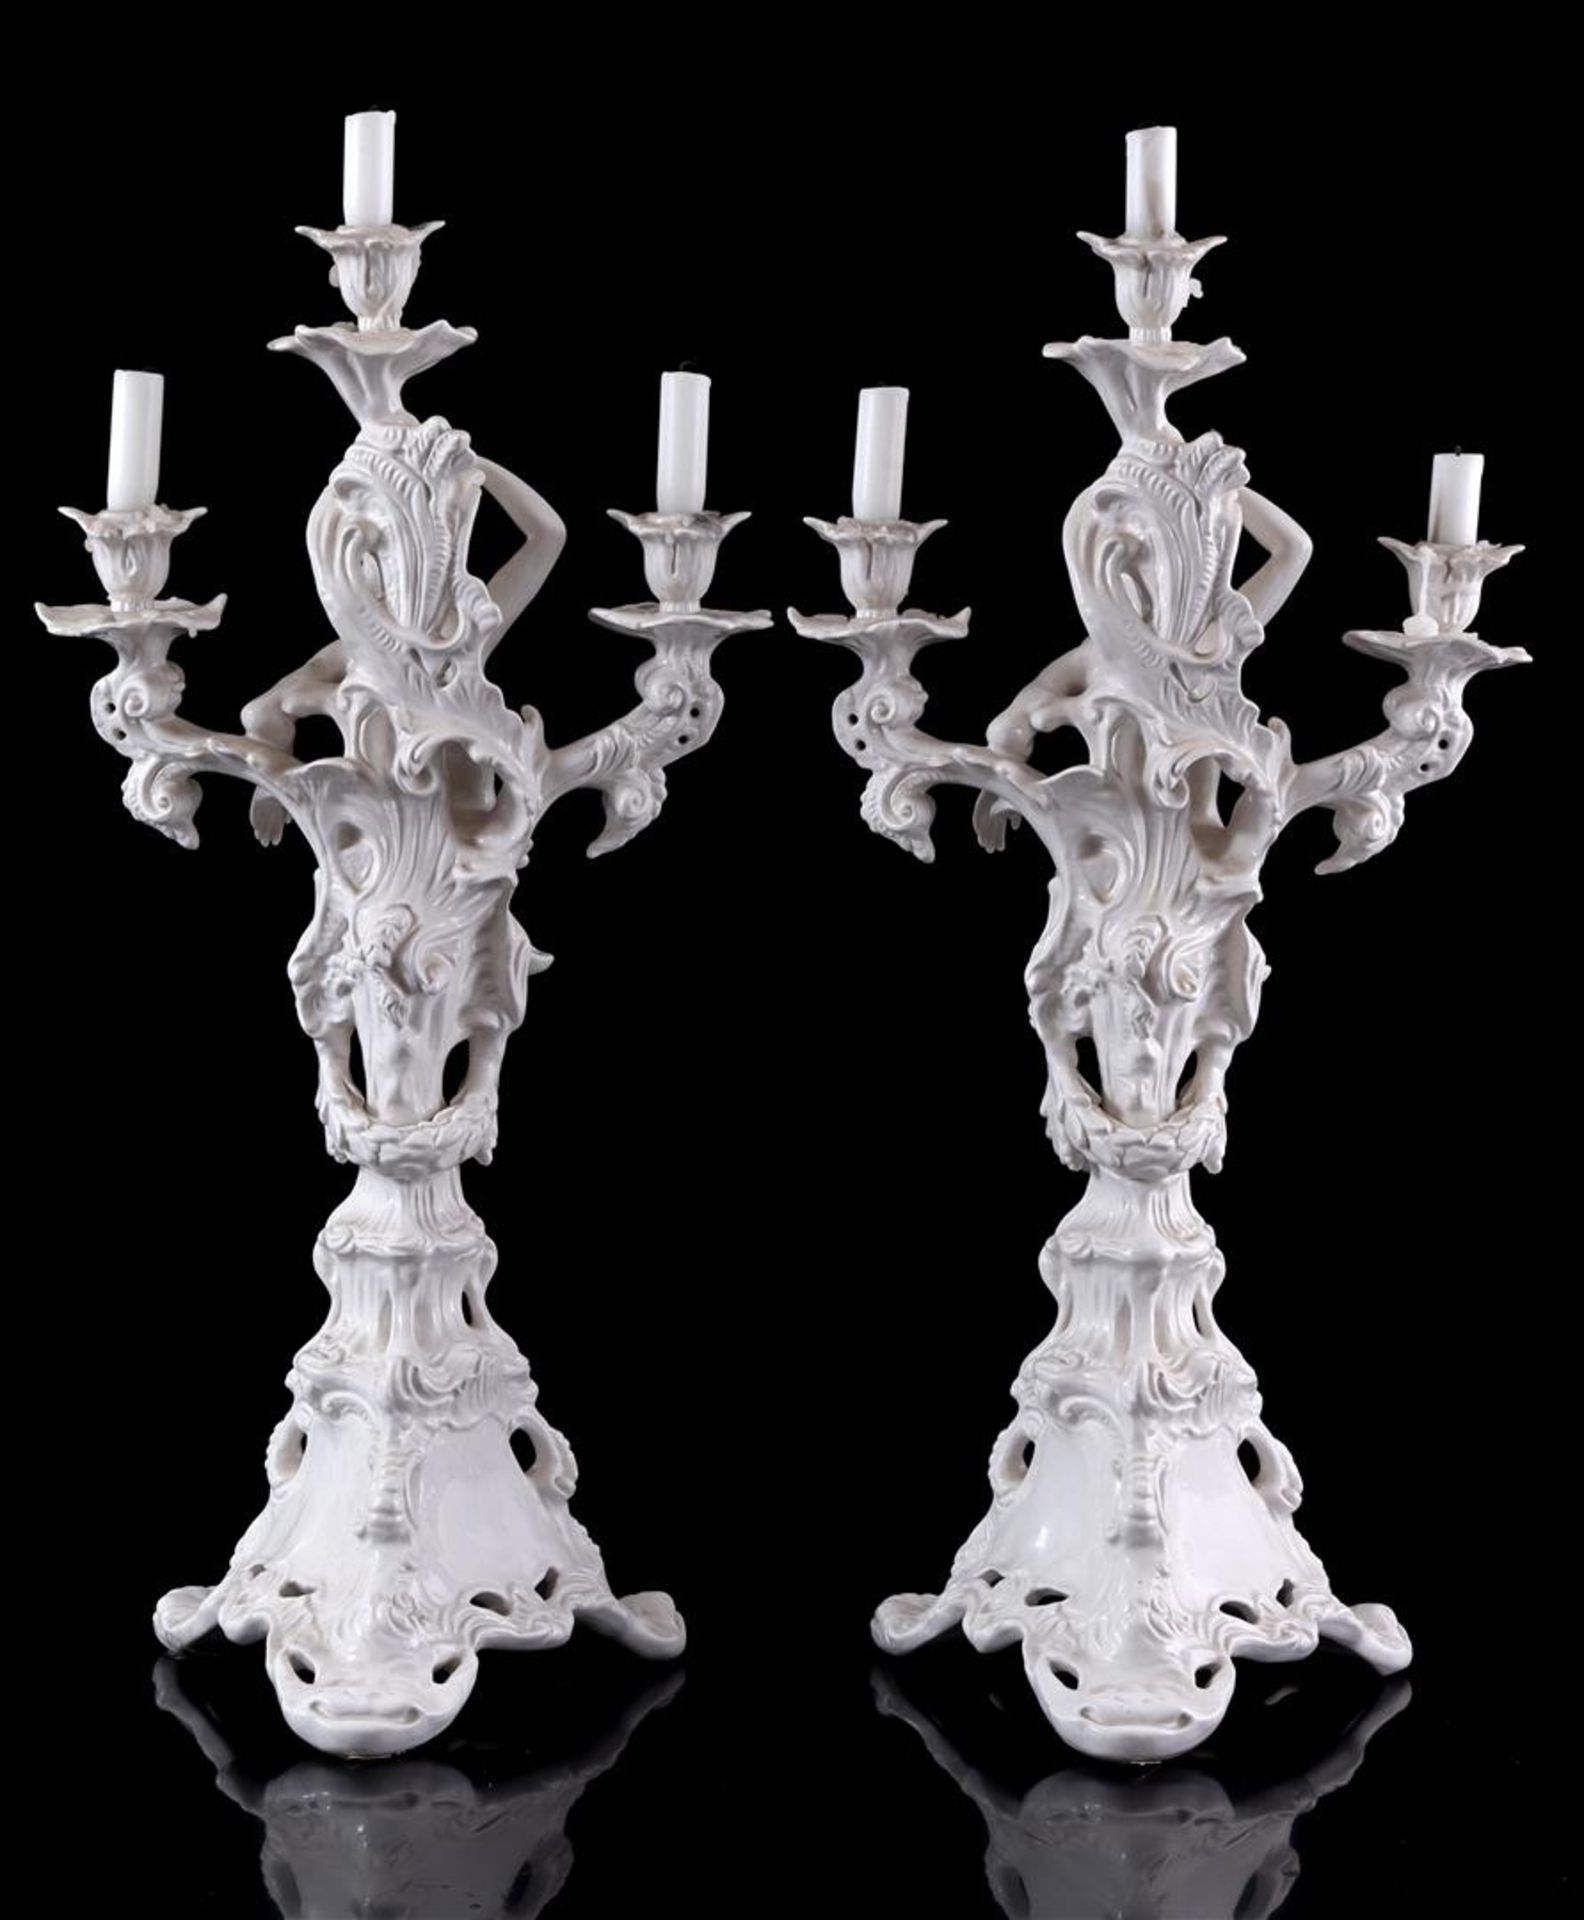 2 candlesticks in Rococo style - Image 4 of 4